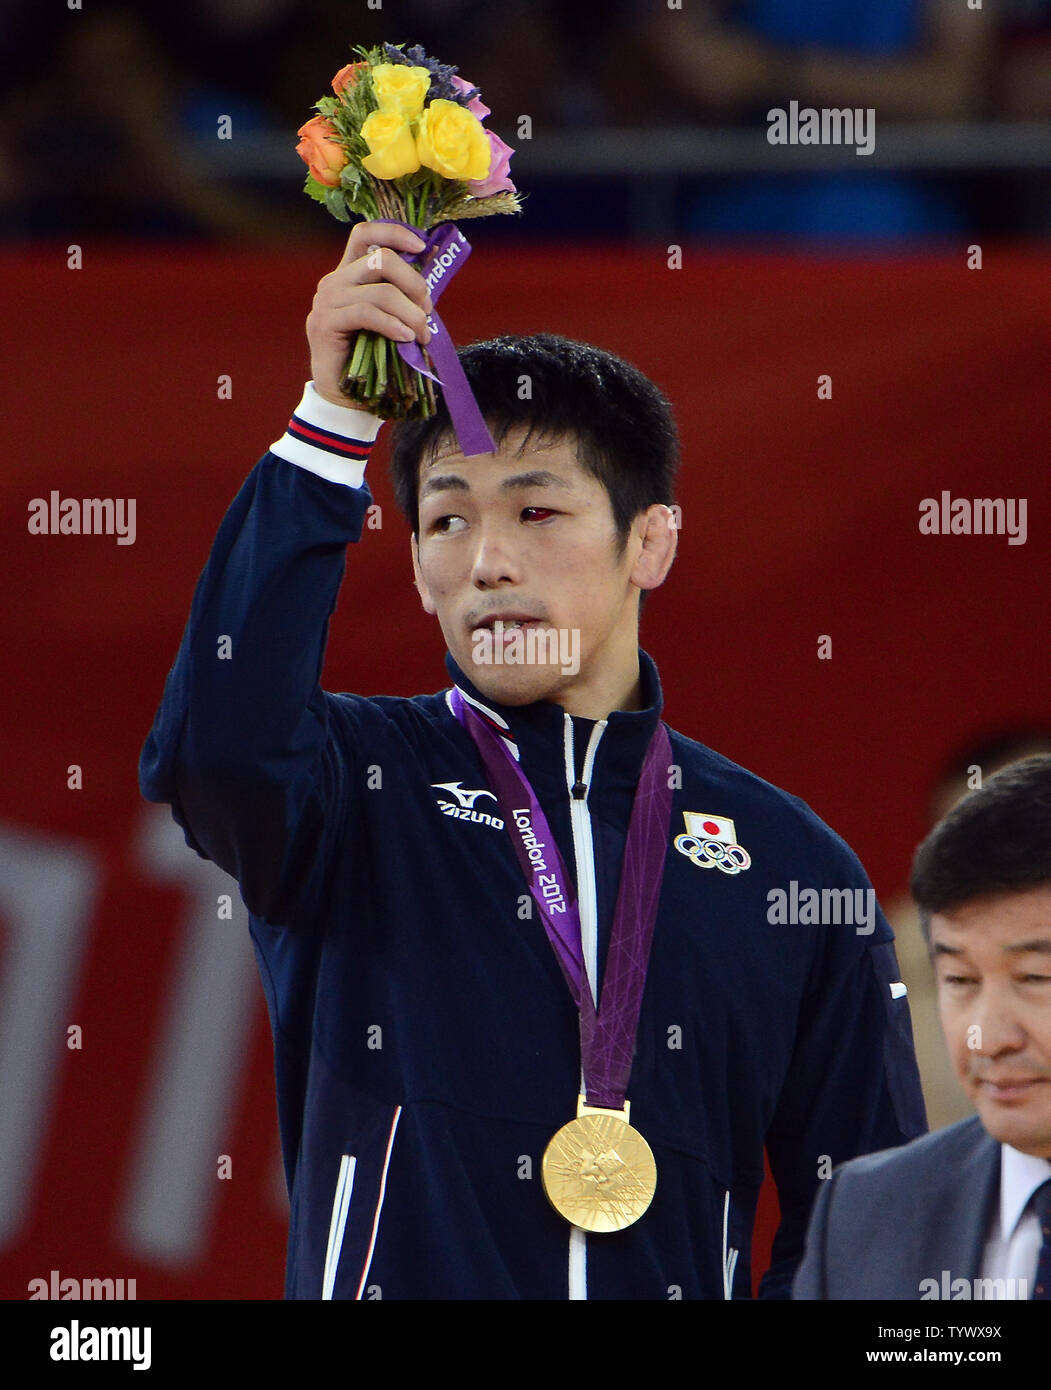 Tatsuhro Yonemitsu of Japan acknowledges the cheers of the crowd after receiving the Gold Medal in the Men's 66kg Freestyle Wrestling at the London 2012 Summer Olympics on August 12, 2012 in London.    UPI/Ron Sachs Stock Photo